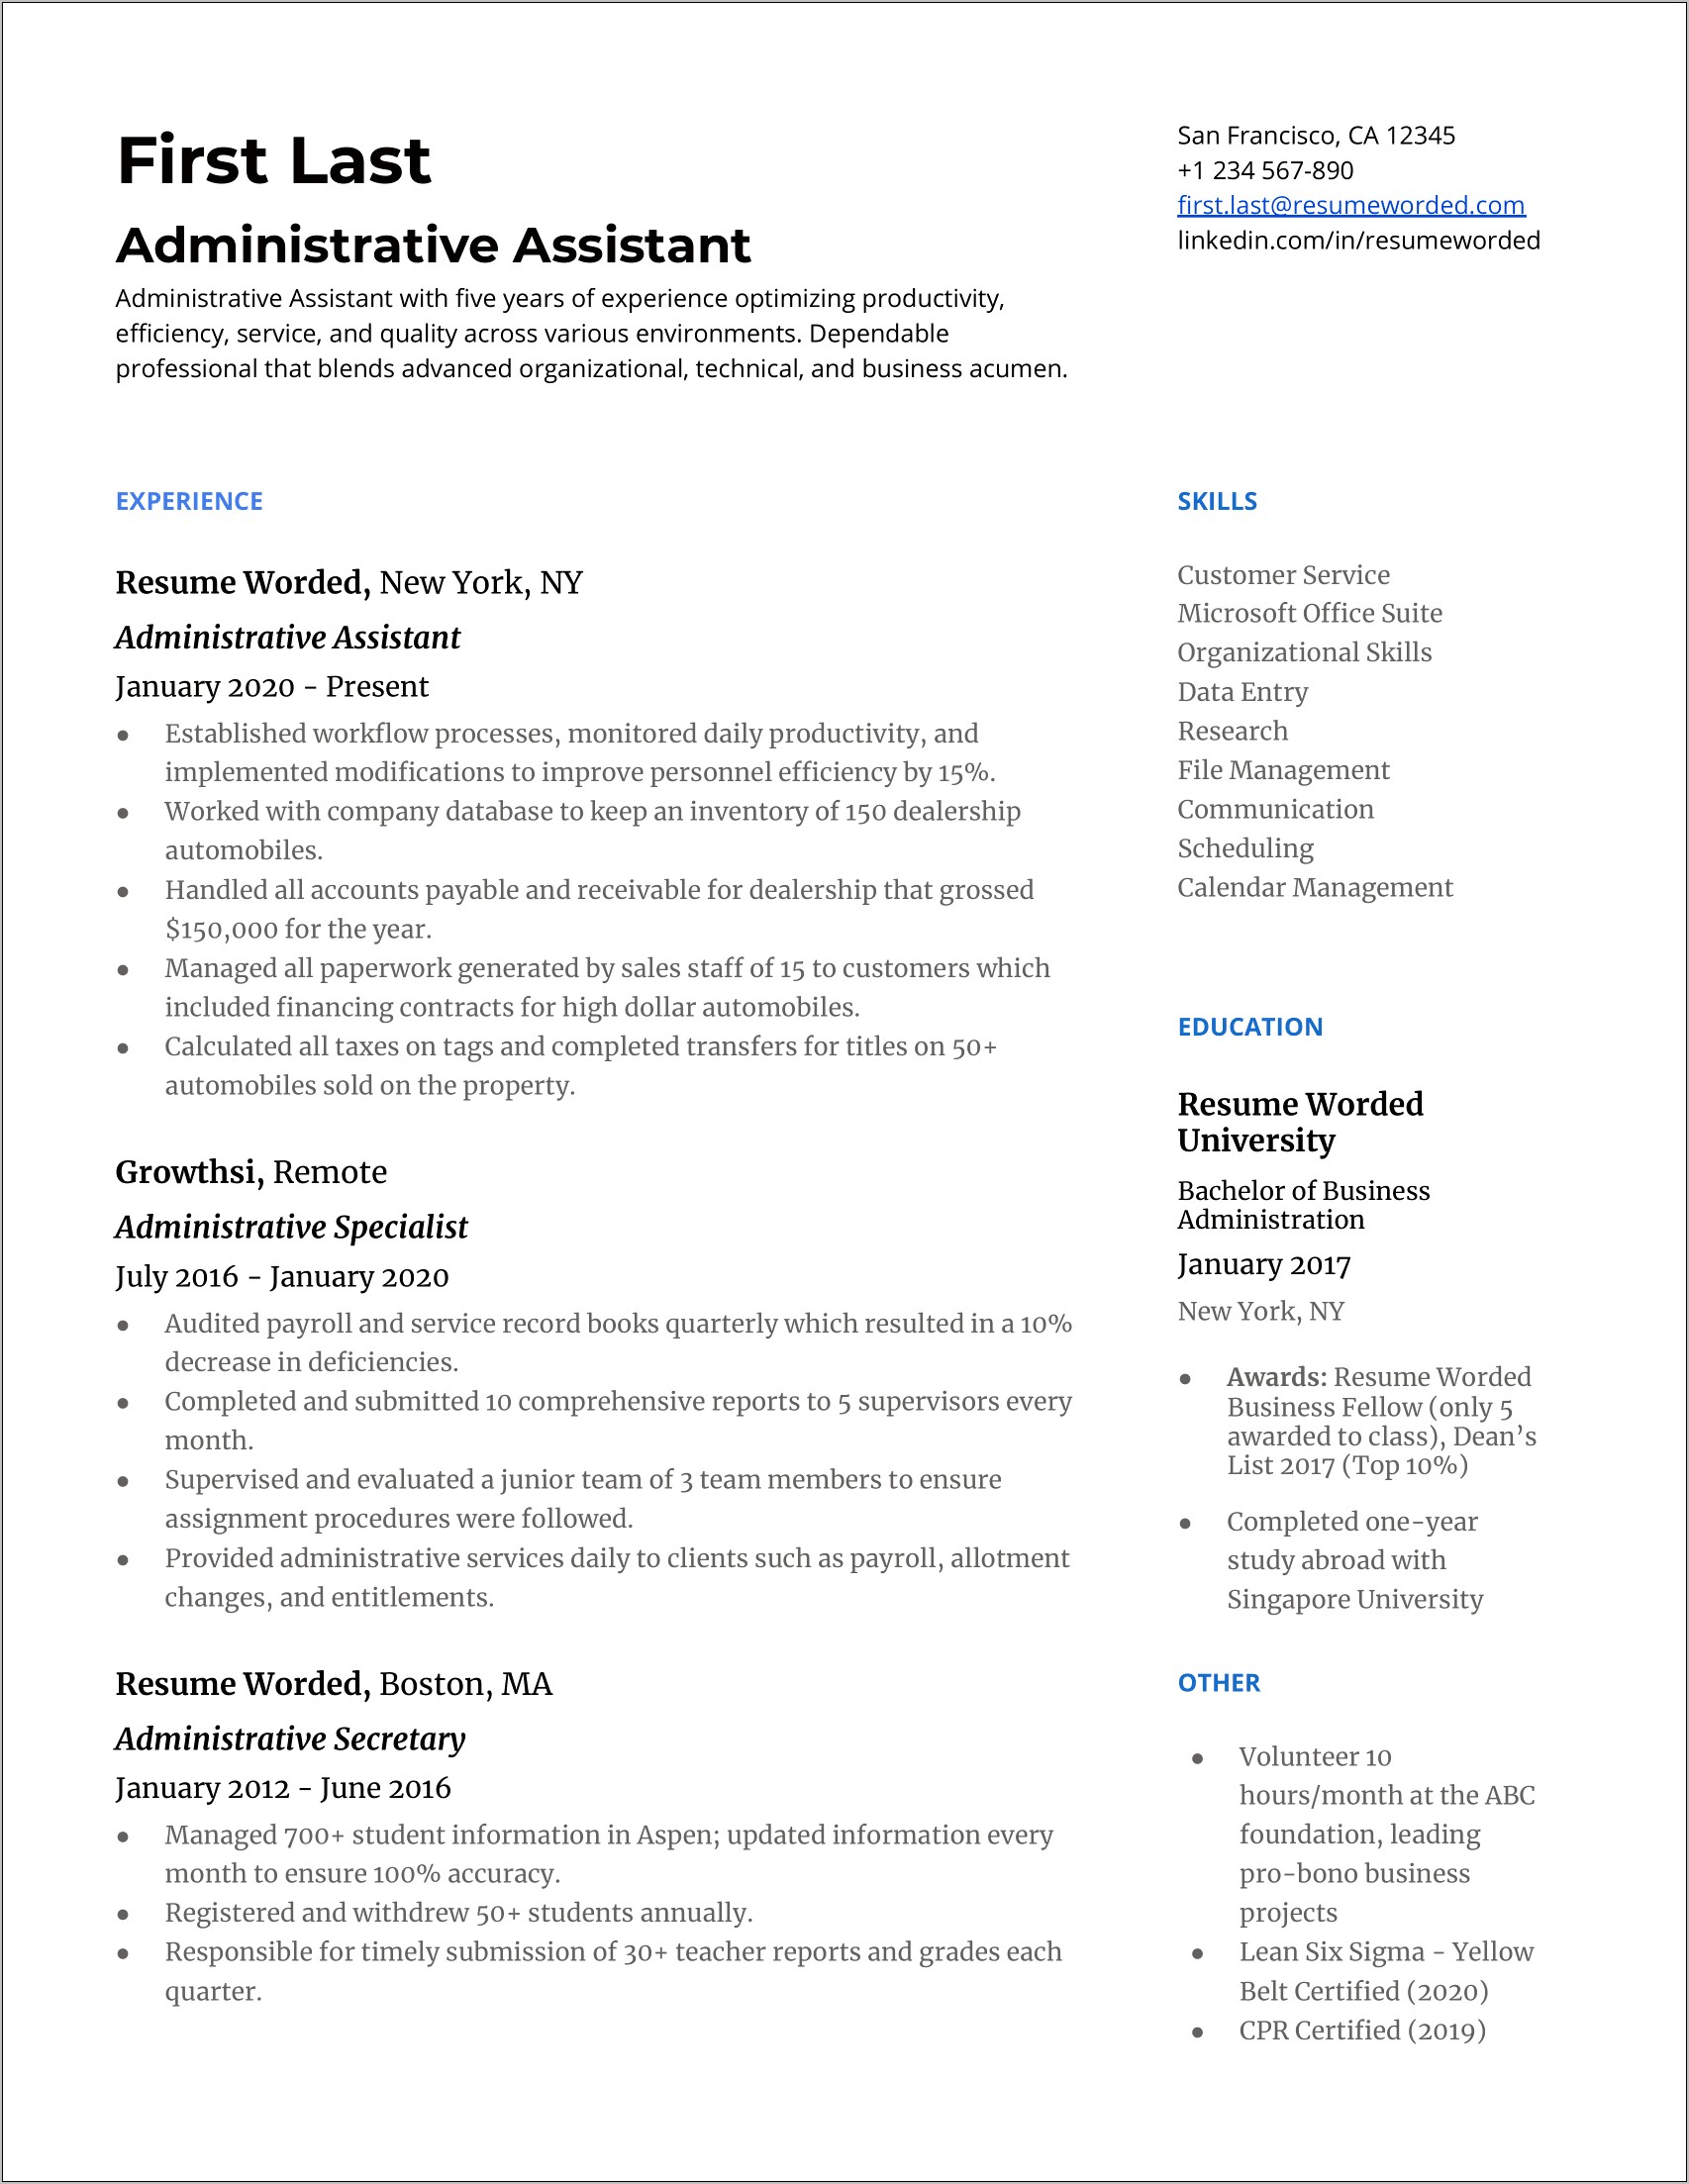 Good Resume Summary For Administrative Office Specialist Position